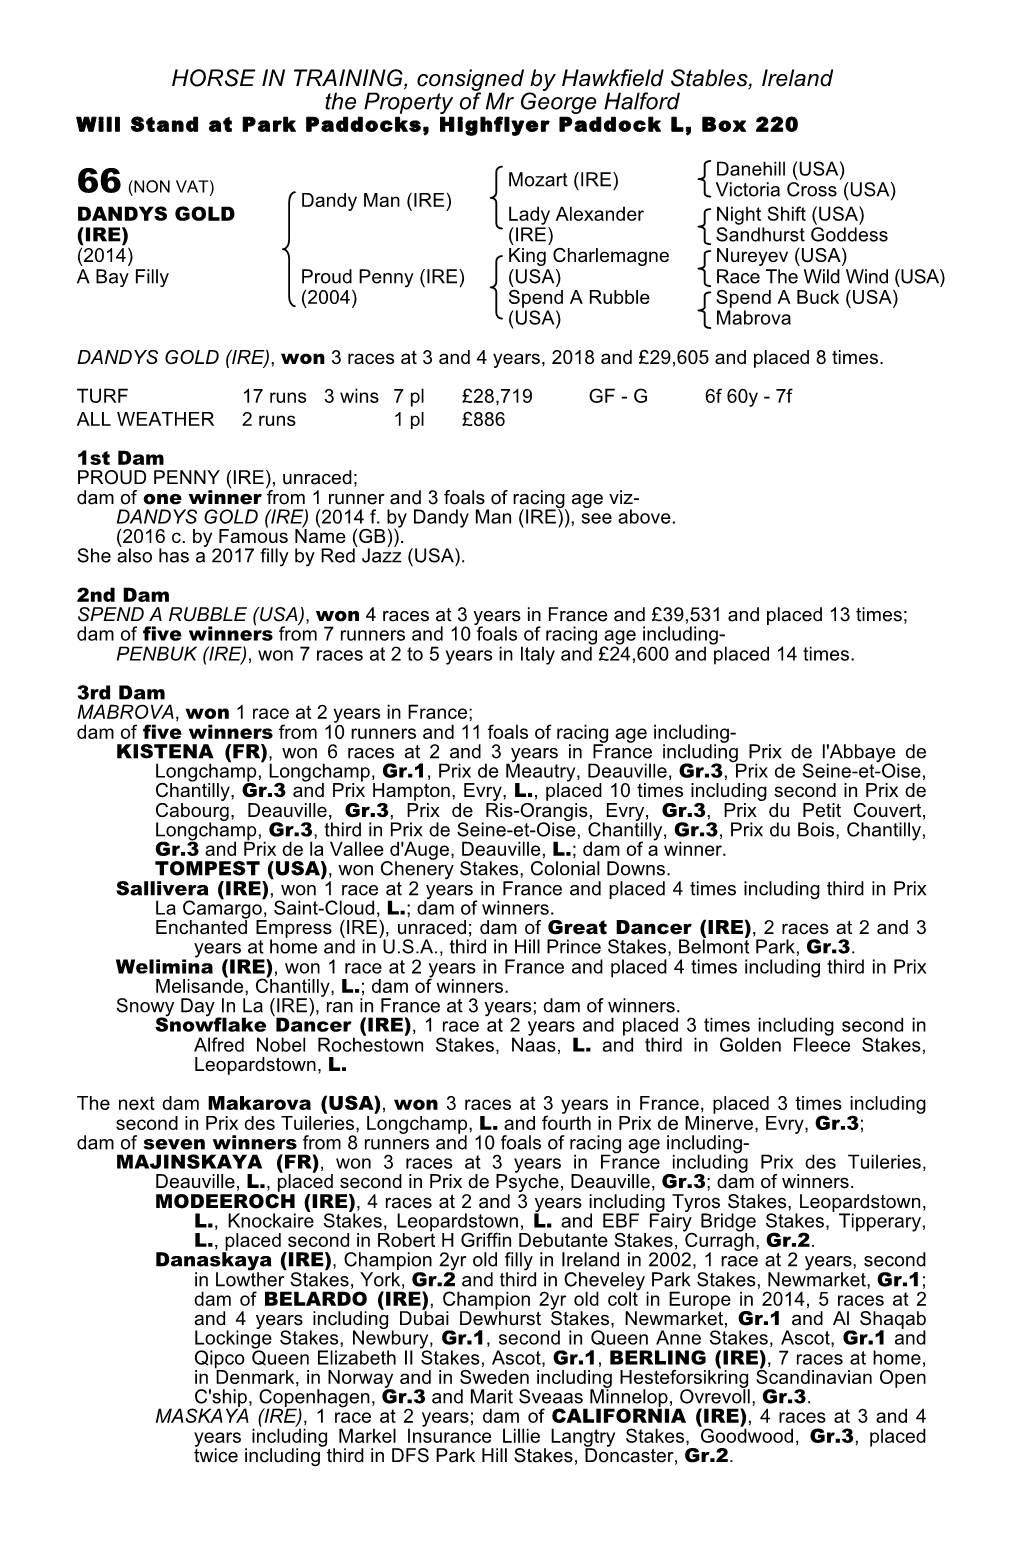 HORSE in TRAINING, Consigned by Hawkfield Stables, Ireland the Property of Mr George Halford Will Stand at Park Paddocks, Highflyer Paddock L, Box 220